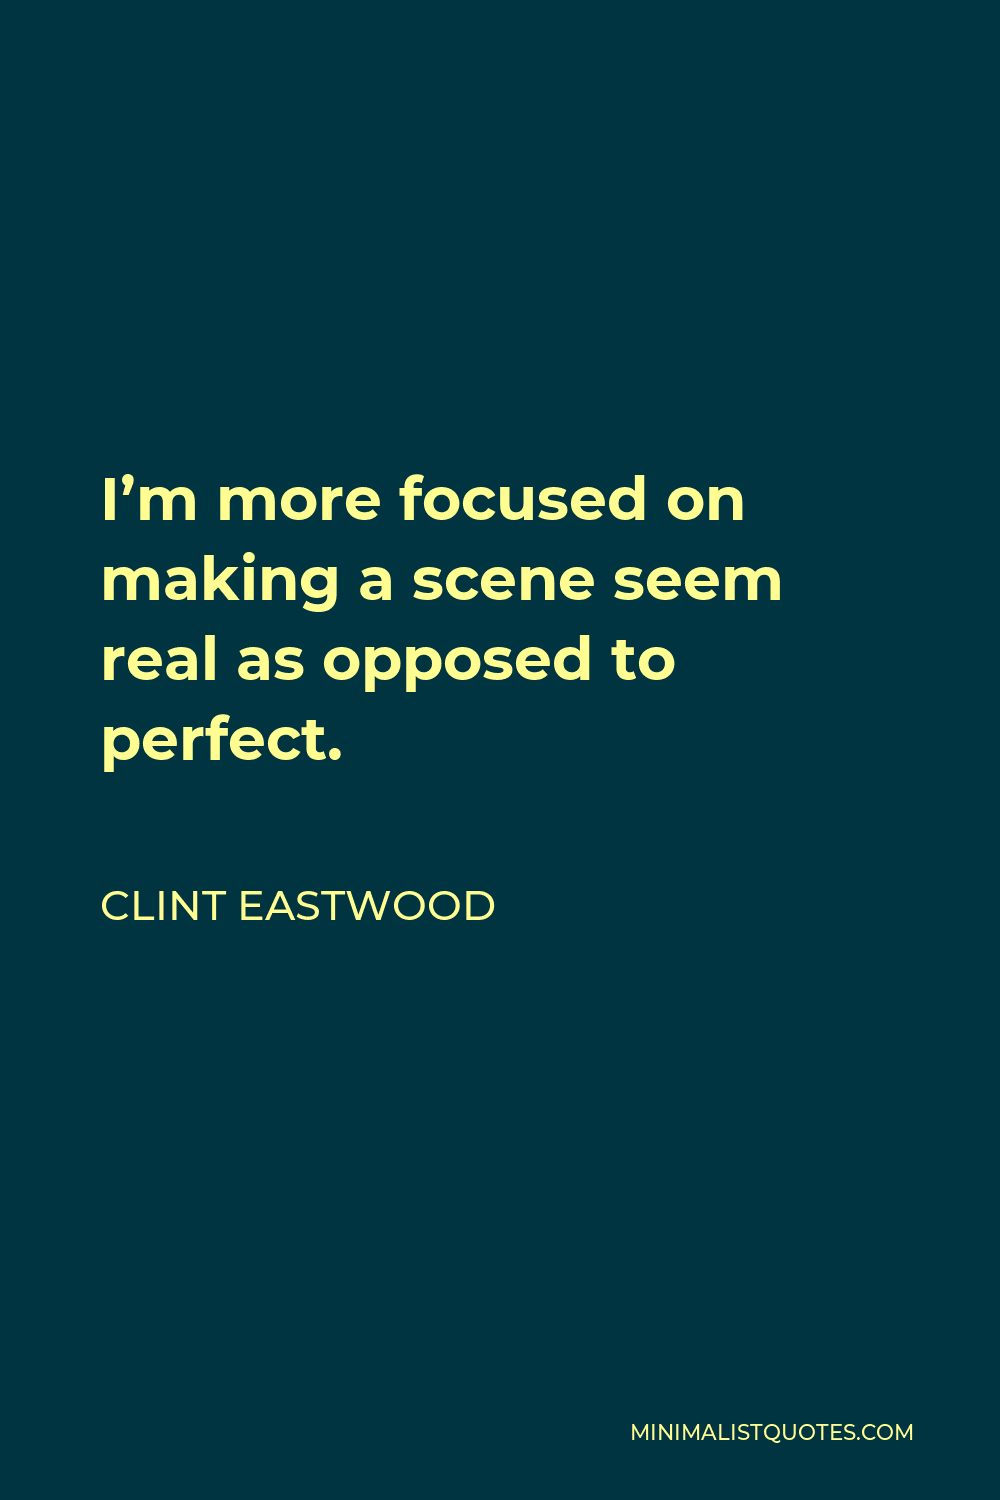 Clint Eastwood Quote - I’m more focused on making a scene seem real as opposed to perfect.